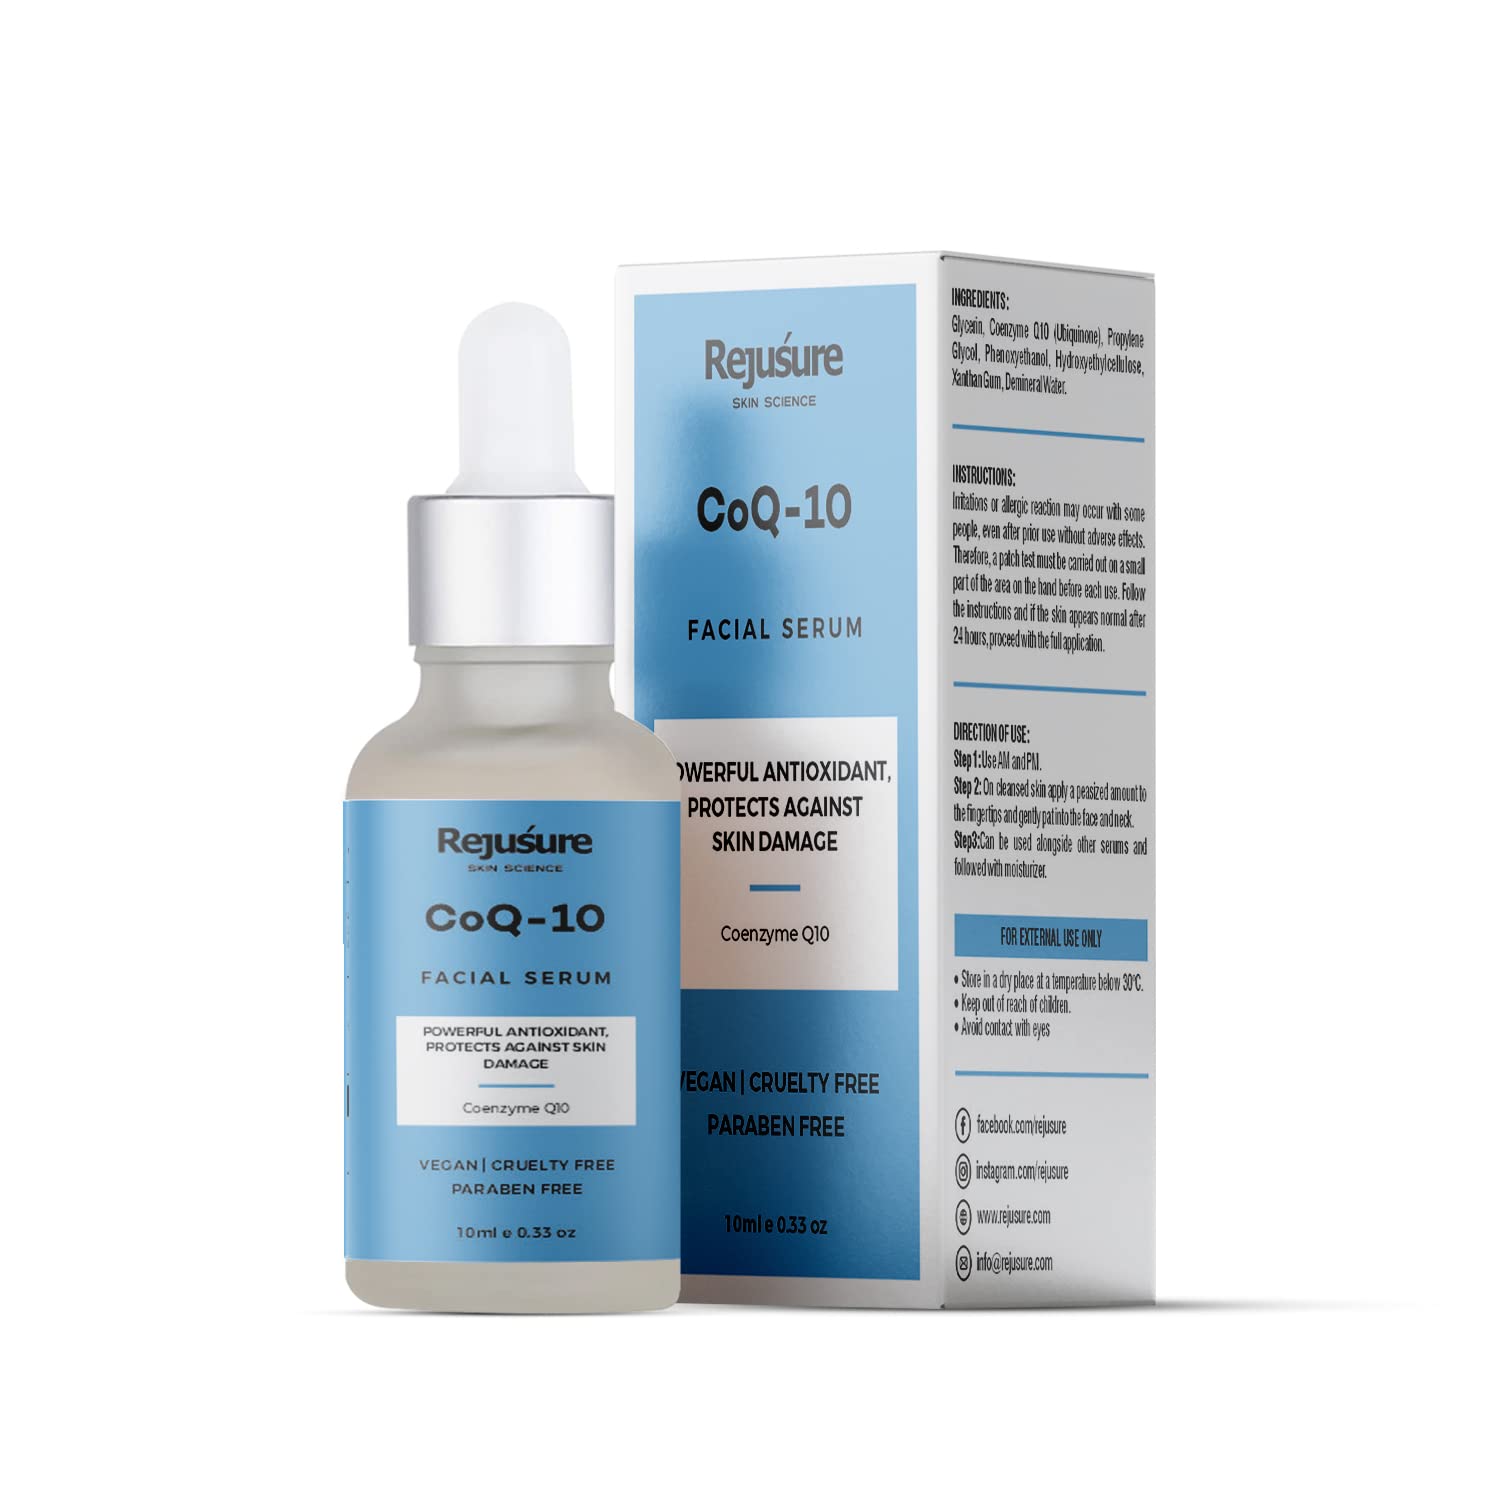 Rejusure Coq -10 Face Serum Powerful Antioxidant, Protects Against Skin Damage| For Men & Women | Cruelty Free & Dermatologist Tested – 10ml